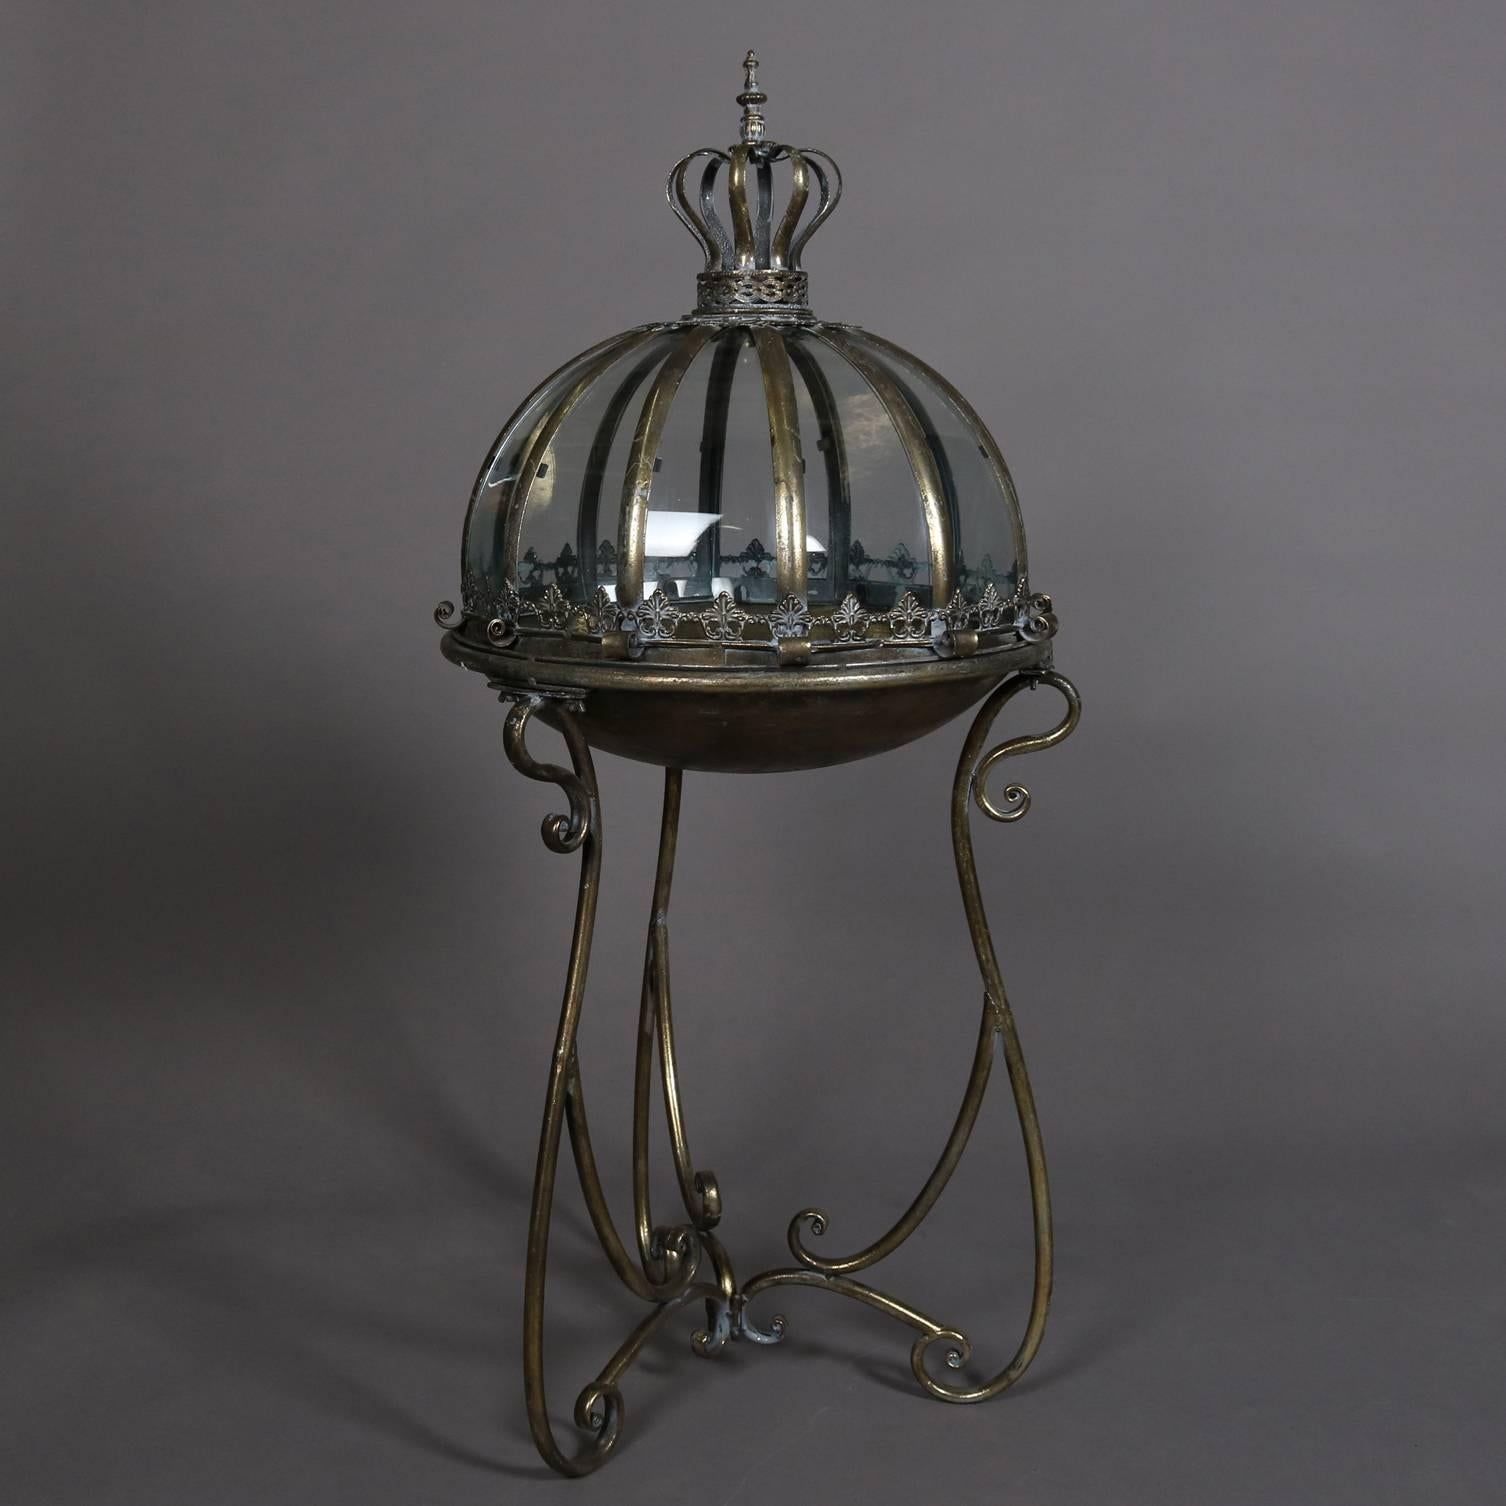 Hollywood Regency terrarium features scrolled metal stand with bowl supporting royal form domed glass cover reminiscent of king's crown, 20th century.

Measures: 40